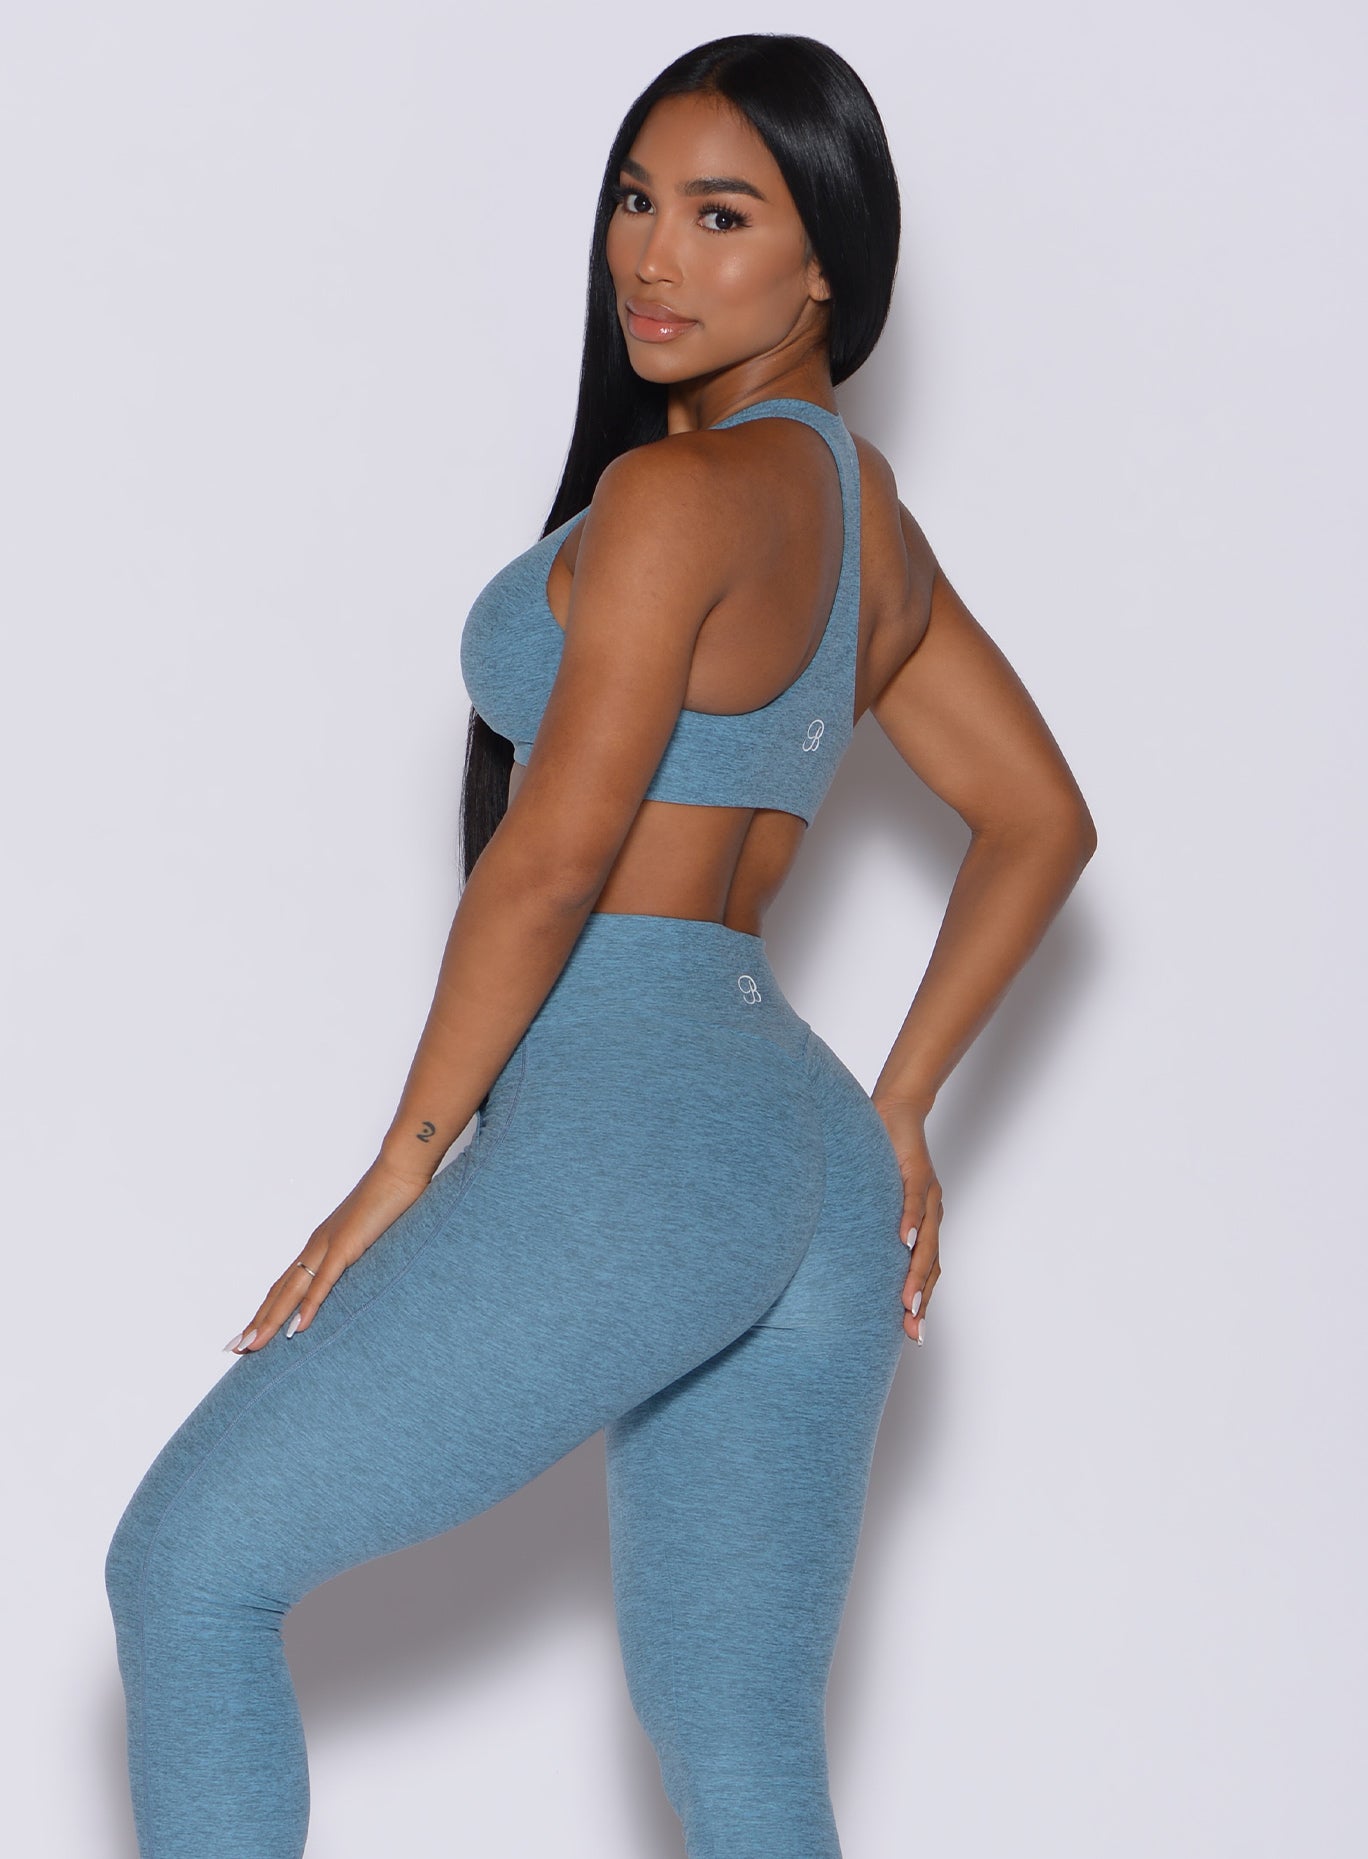 Left side profile view of a model facing to her left wearing  our laced crop bra in baby blue color and a matching leggings